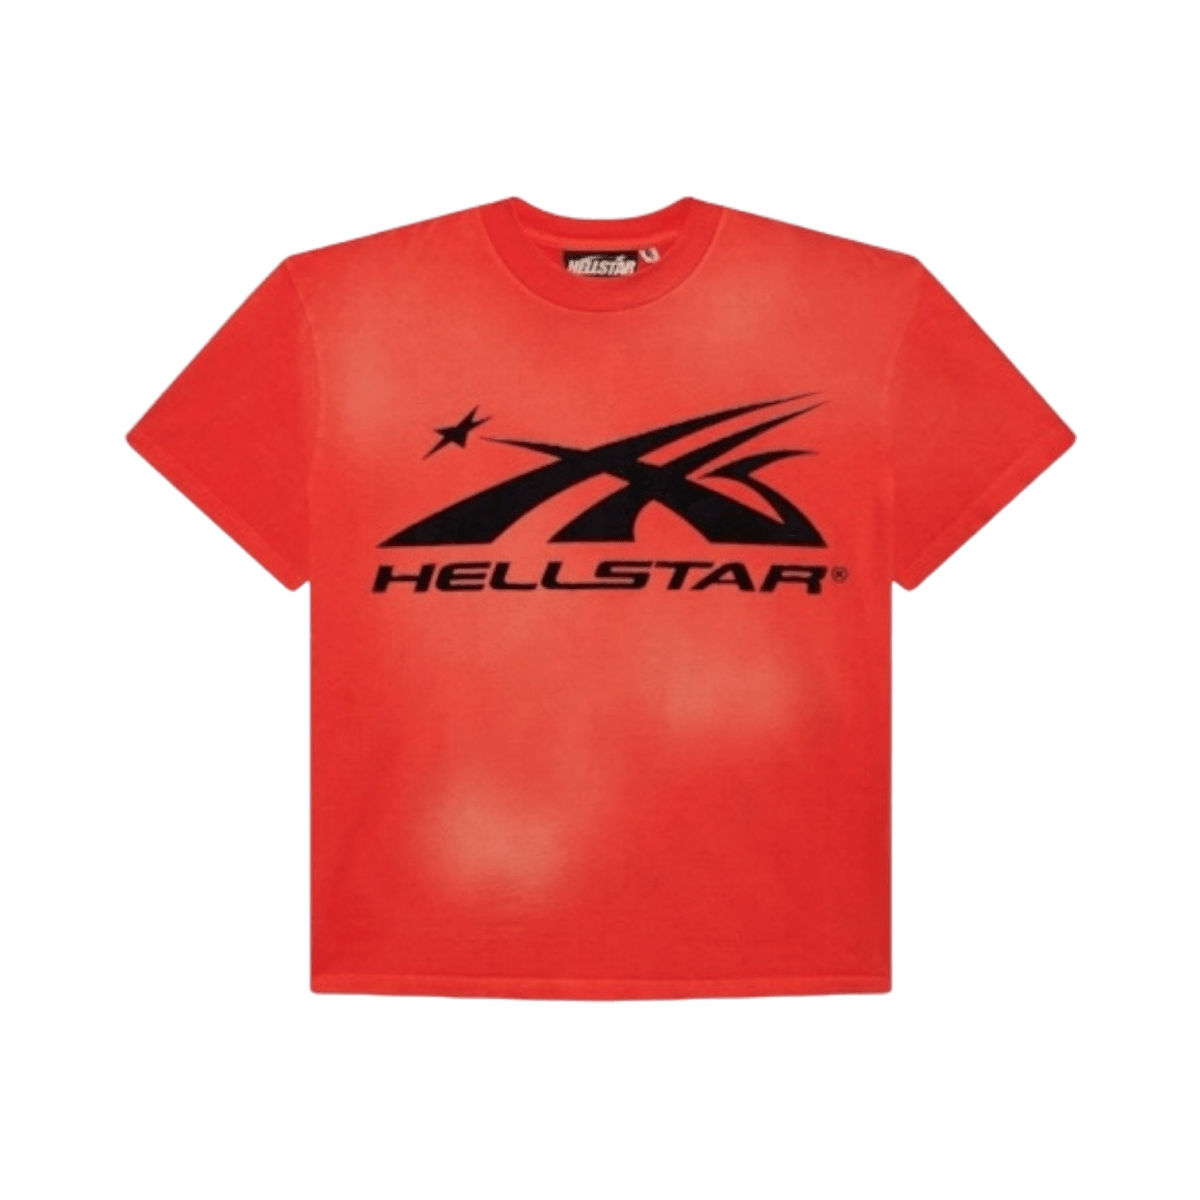 HellStar Studios HellStar Studios Sports Logo T-Shirt - Red Apparel & Accessories  Clothing  Shirts & Tops available at Jawns on Fire Sneaker & Streetwear Boutique. All items come with our industry leading Double Your Money Back Authenticity Guarantee.